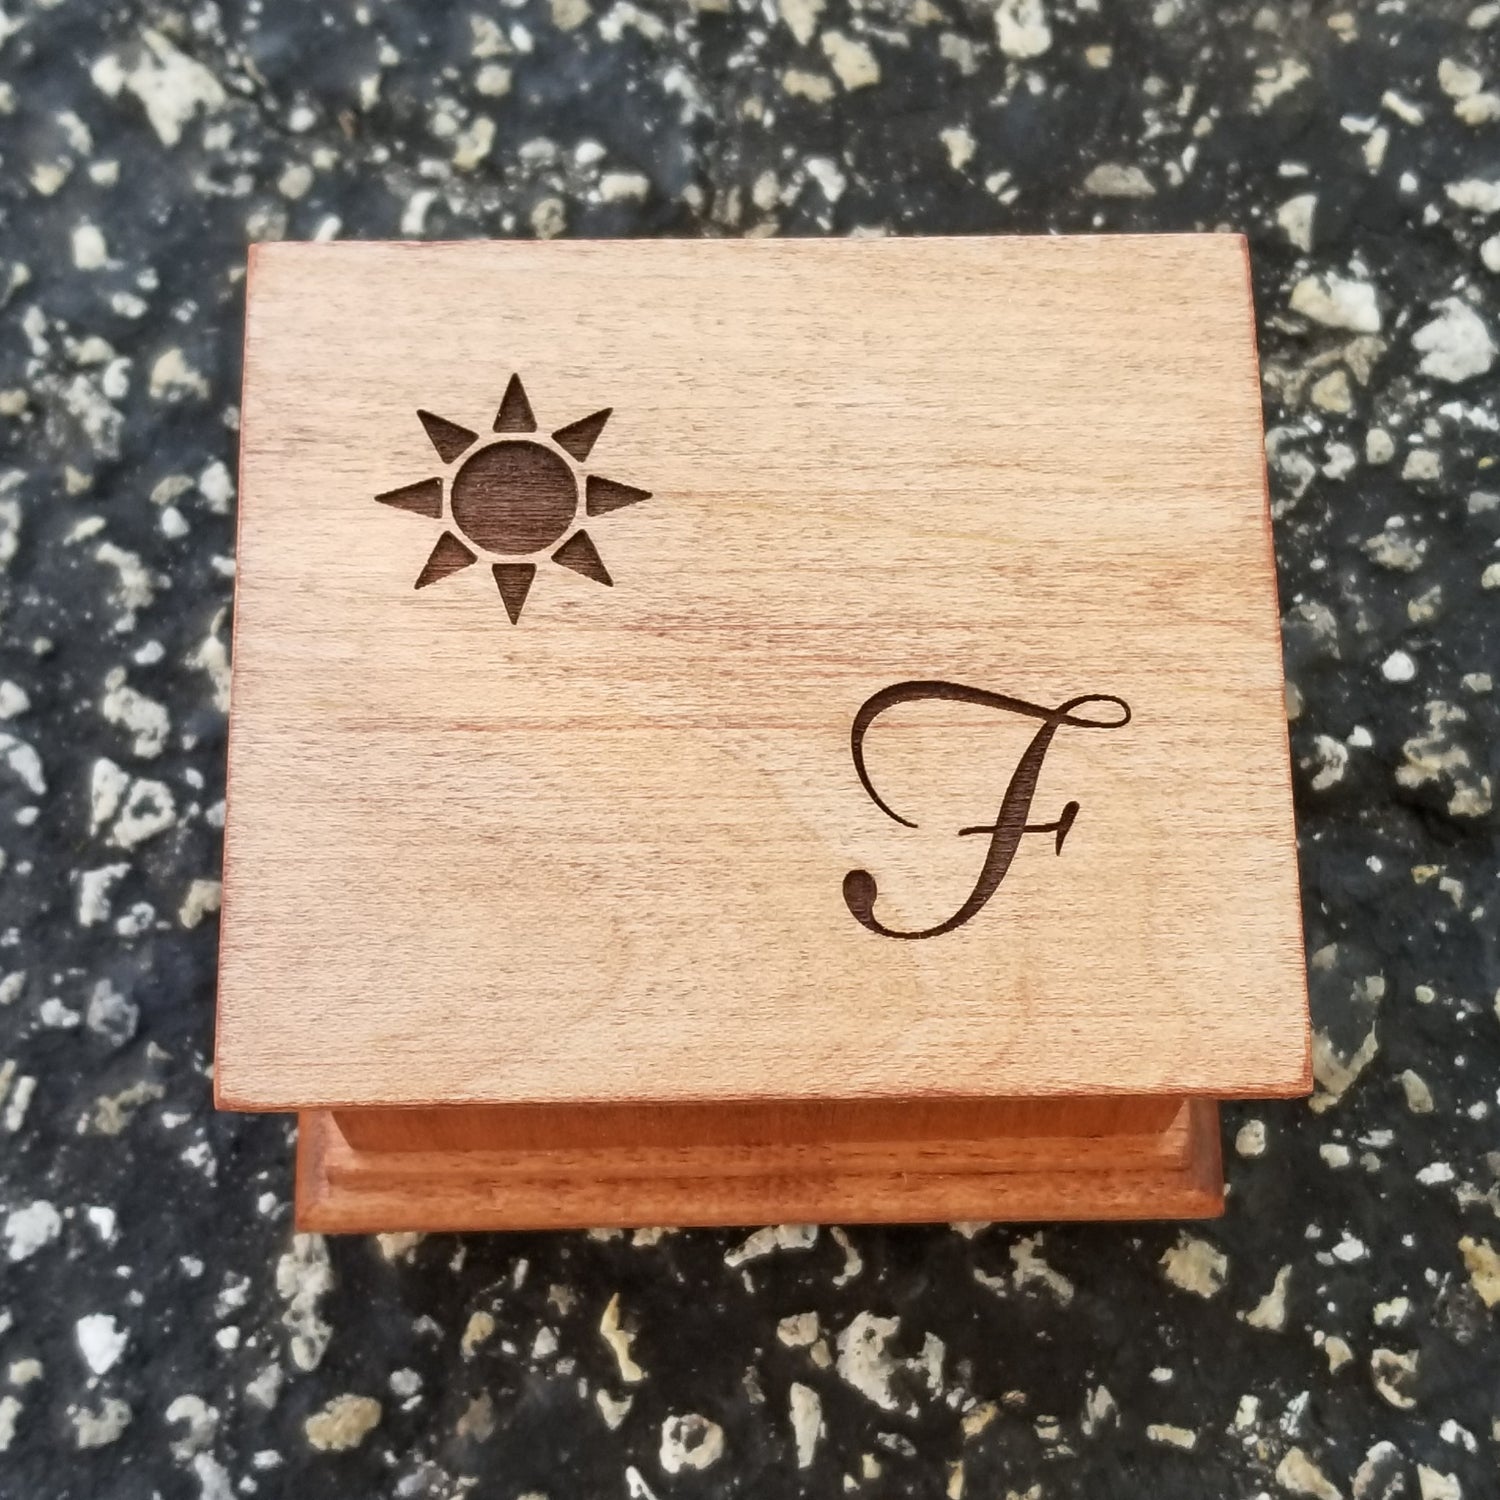 wood music box with a sun image and a monogram engraved on top, personalizing option